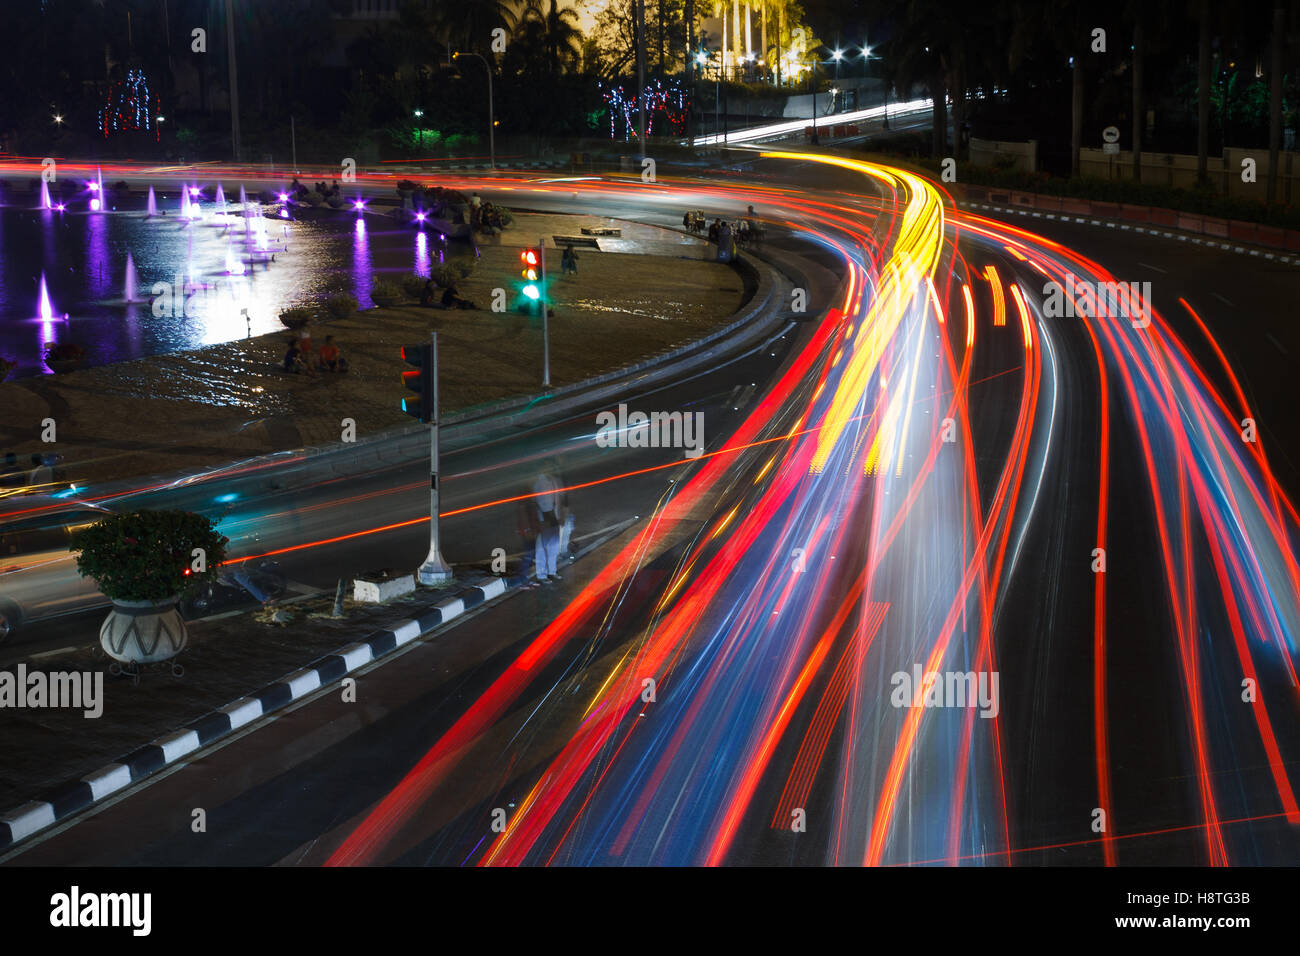 Light trails from vehicles traffic on the street at night. Long exposure photography. Stock Photo